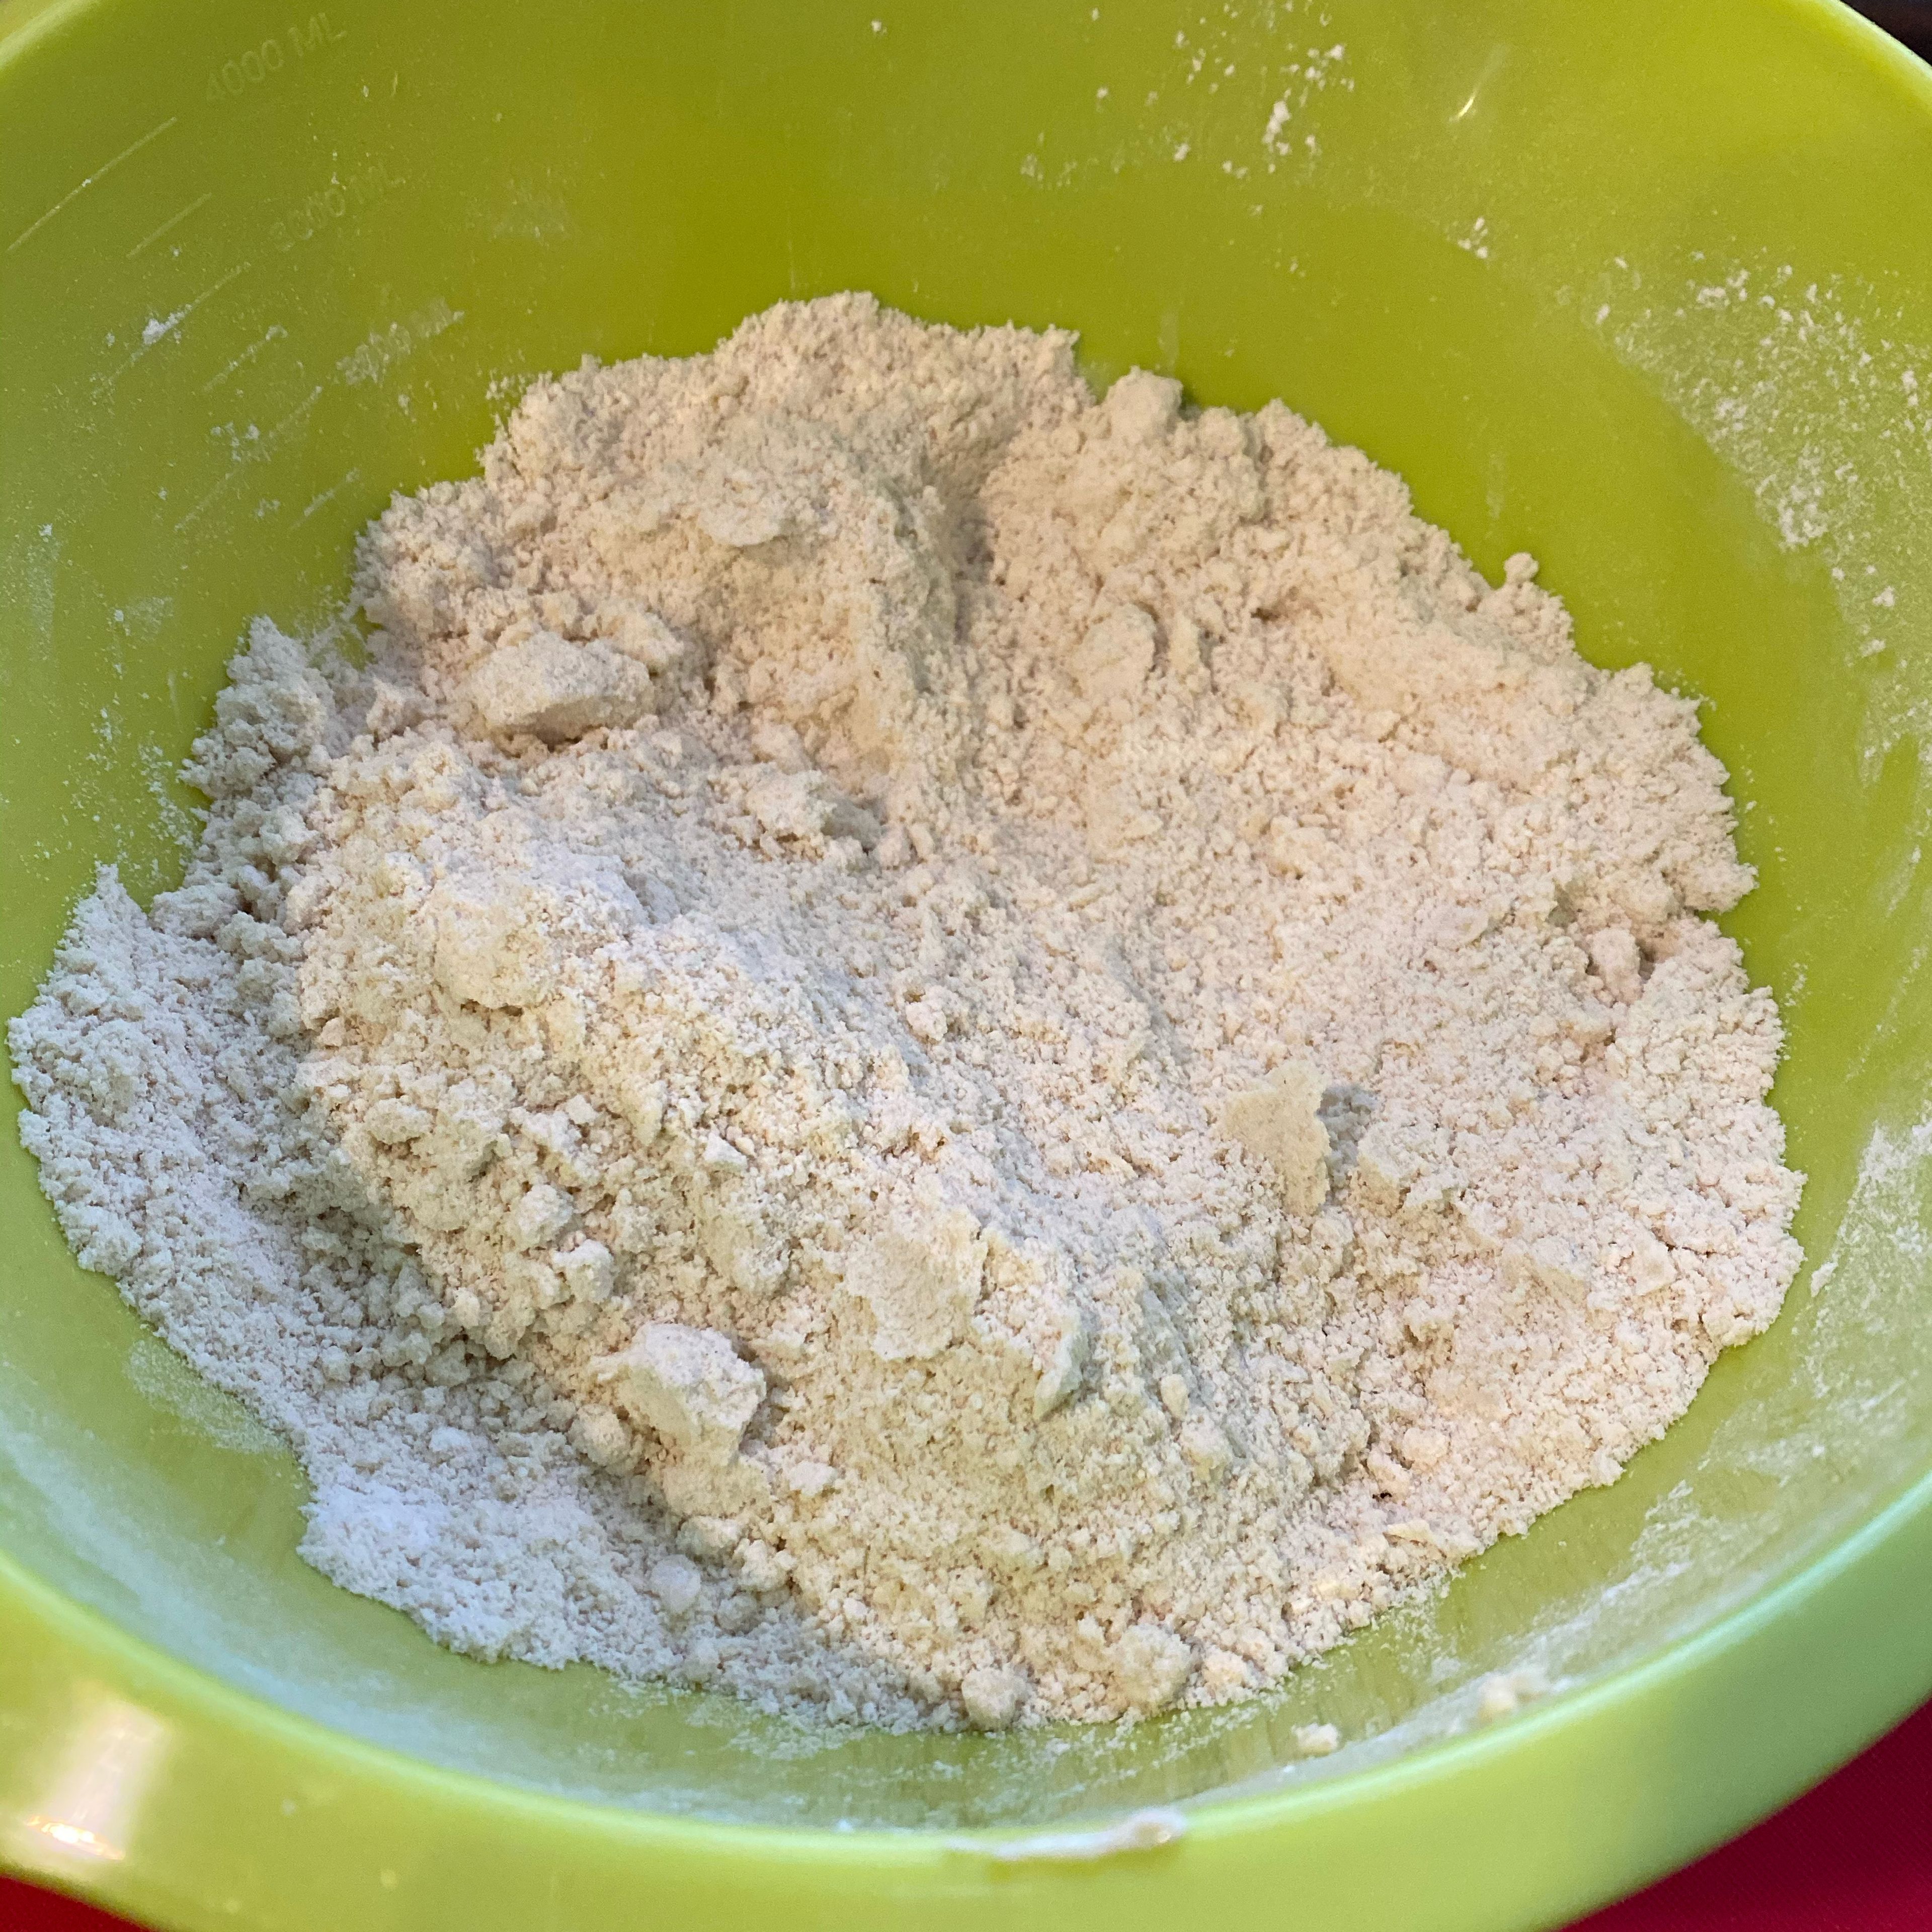 Add the flour, salt, butter, and 1 heaped tsp of baking powder to a big mixing bow and mix everything with your fingers until it resembles fine breadcrumbs.